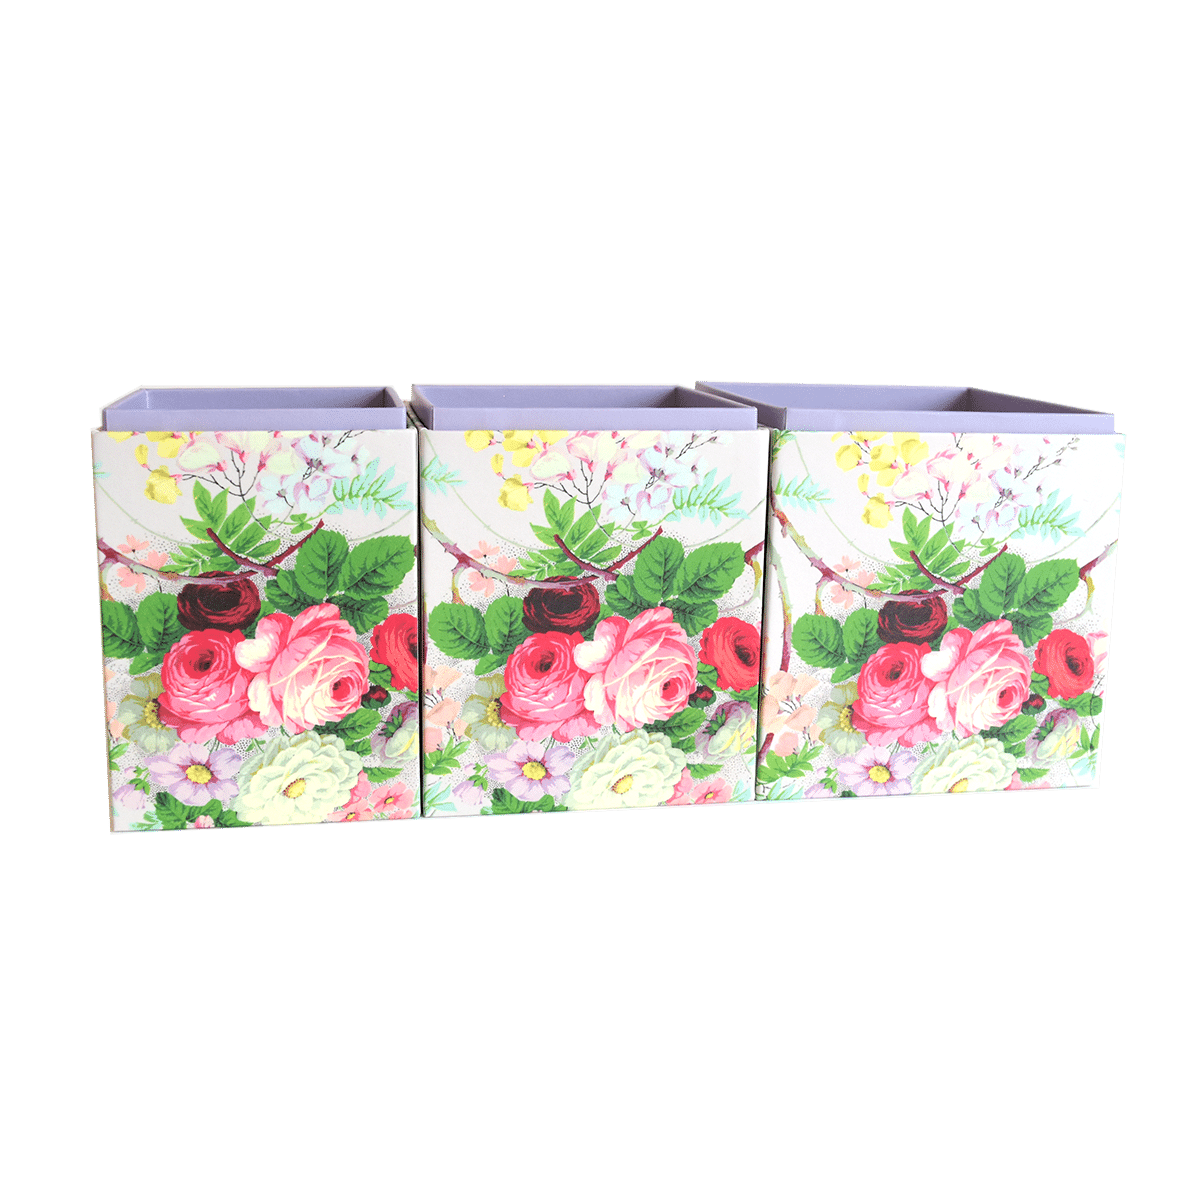 three boxes with flowers painted on them.